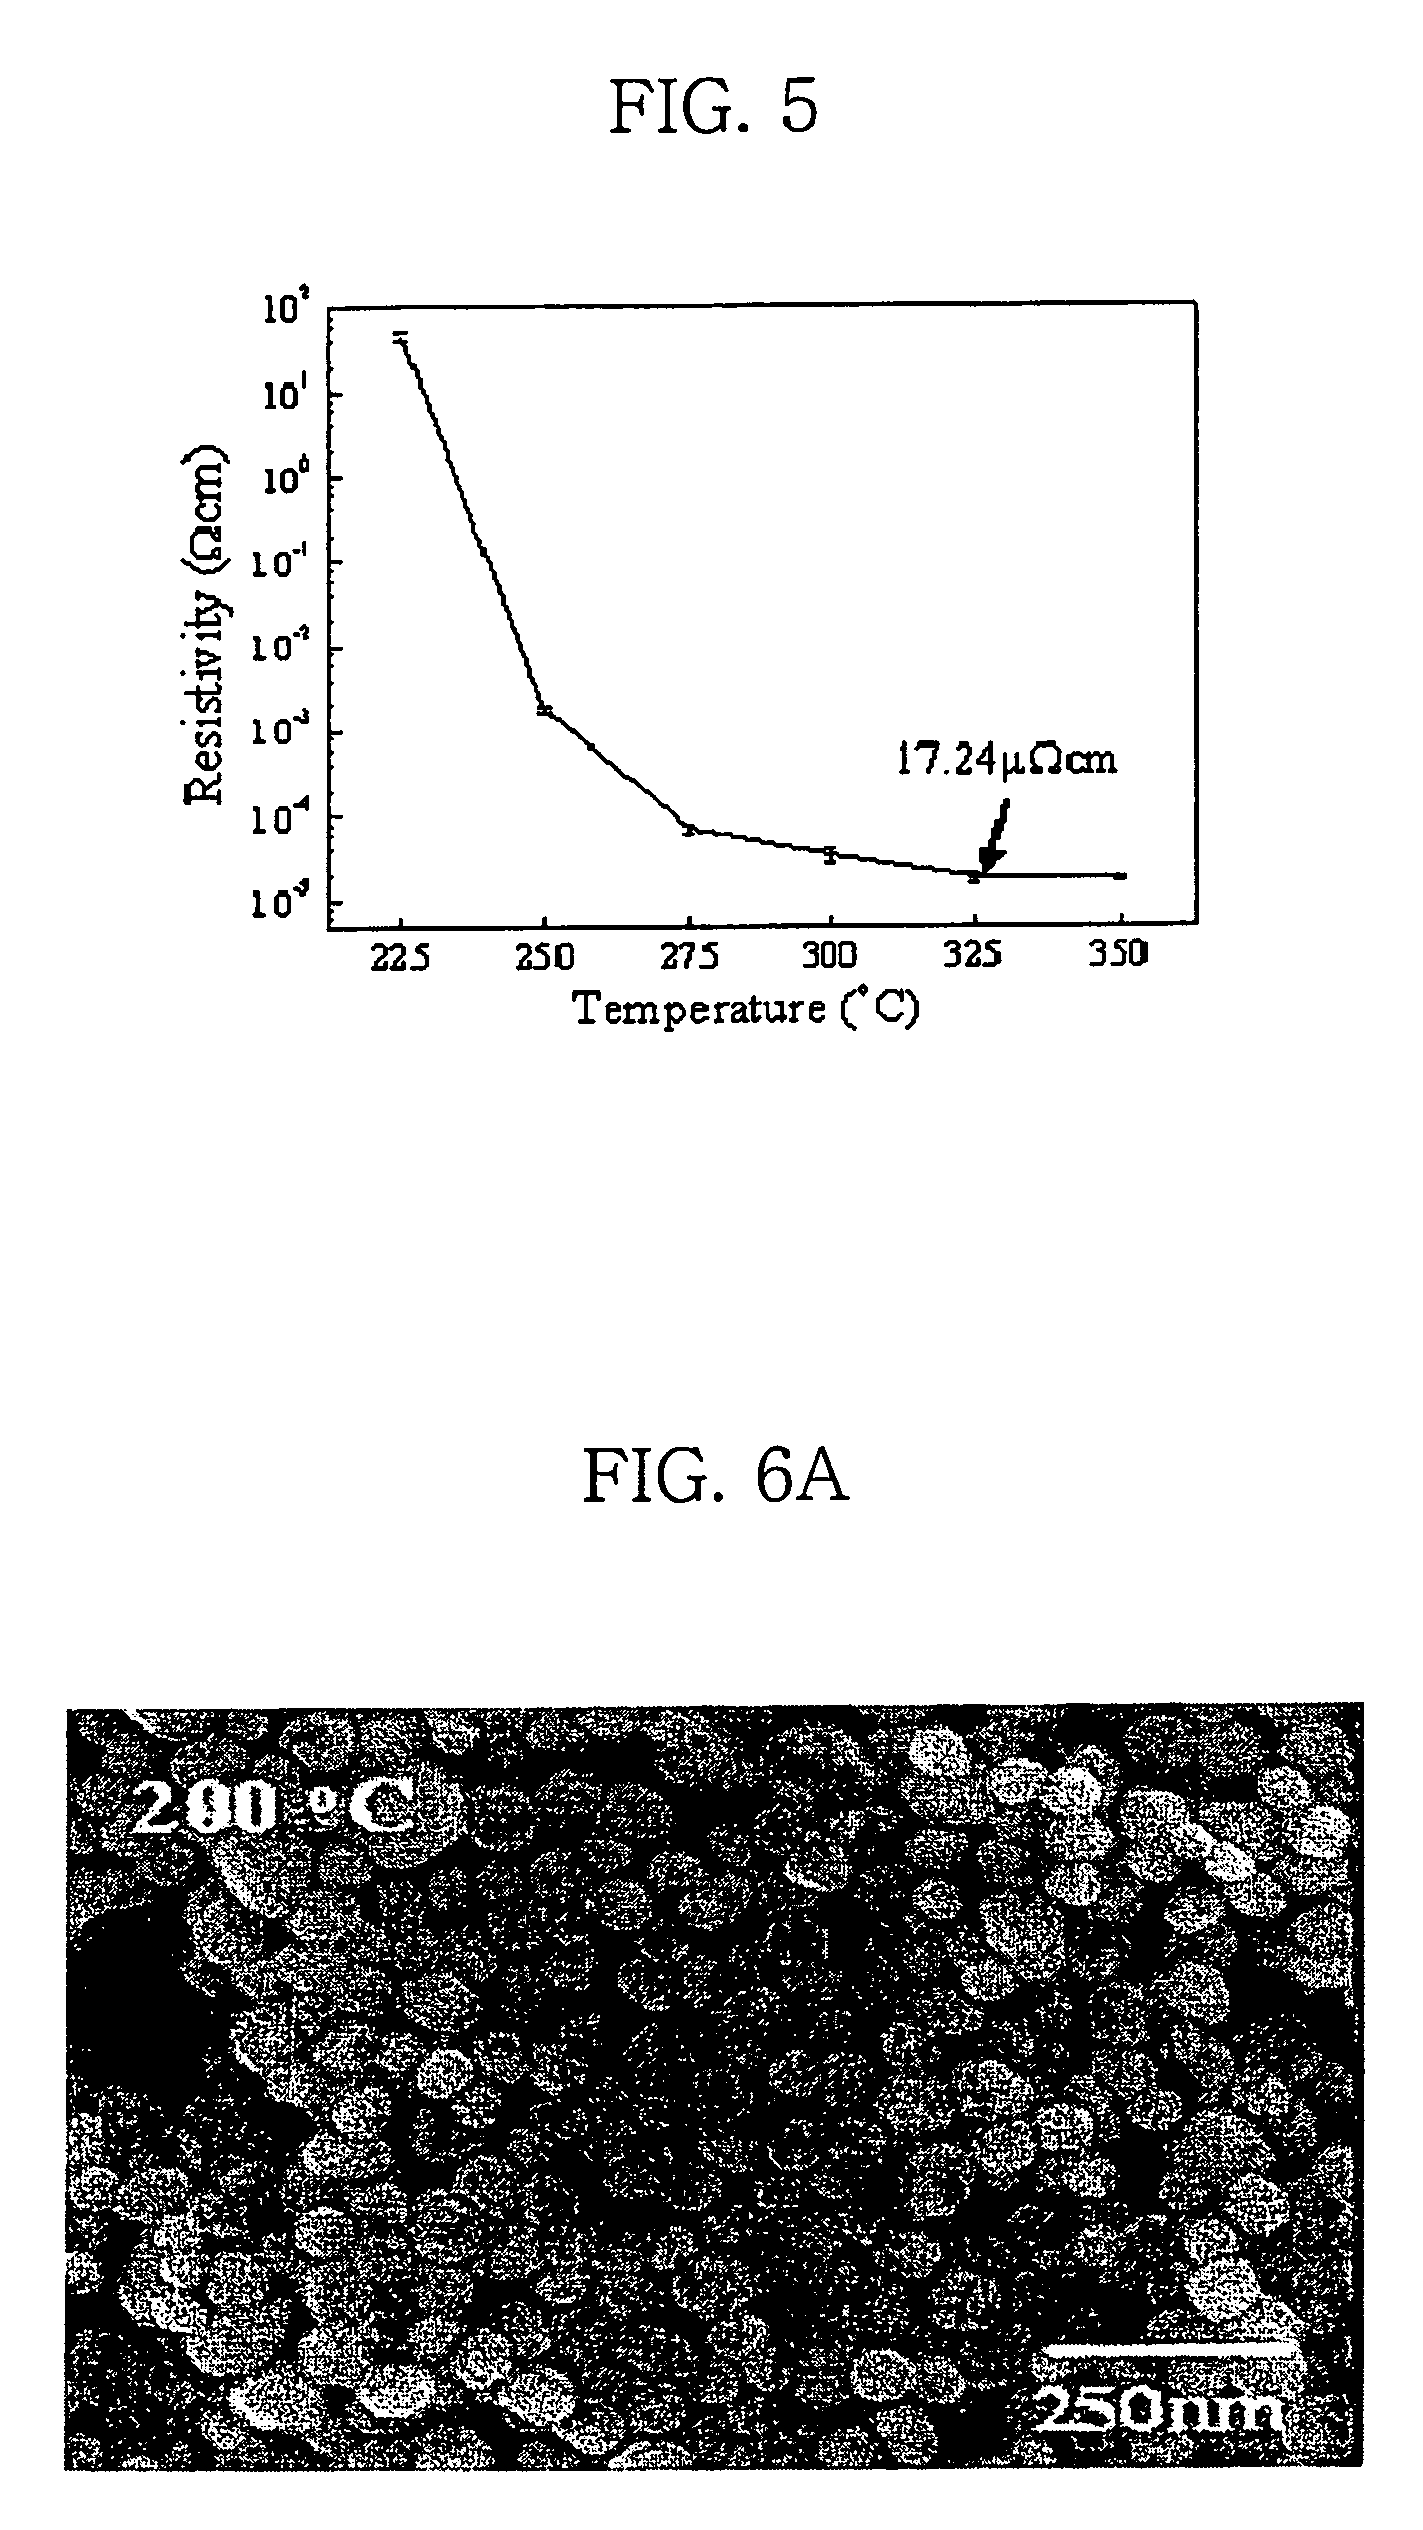 Conductive ink composition and method of forming a conductive pattern using the same